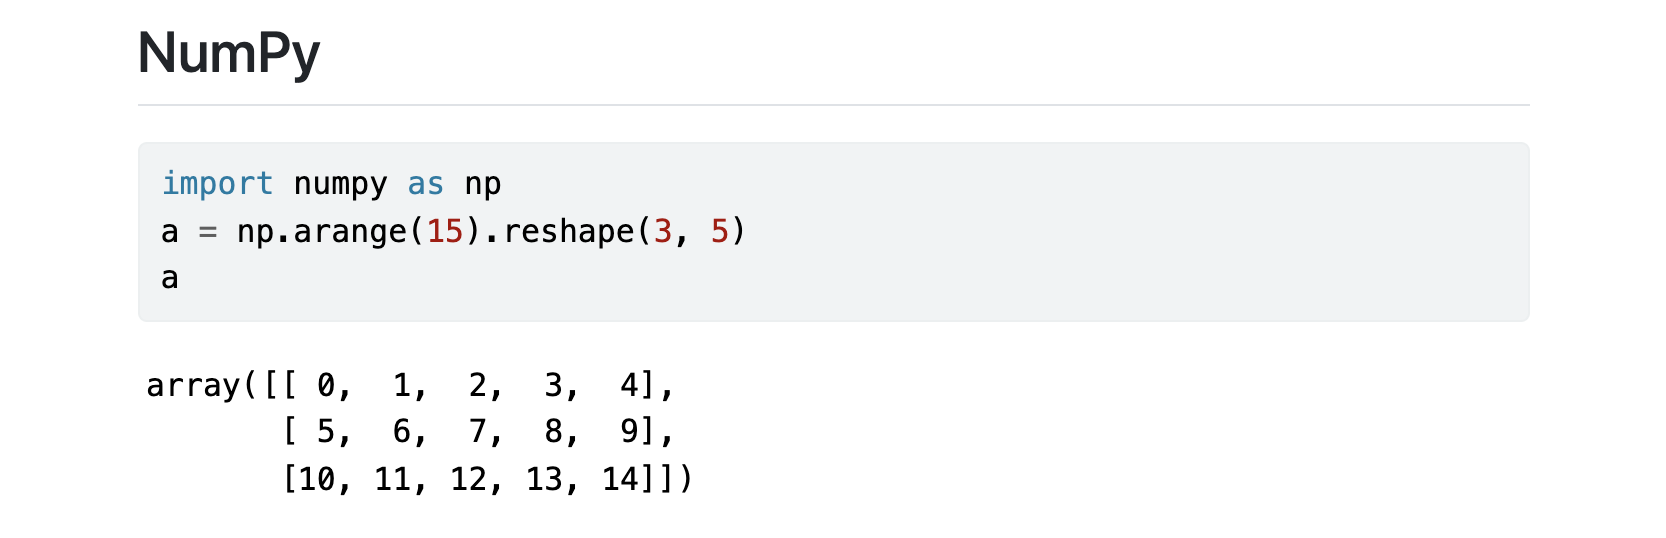 Screen shot of rendered NumPy section of Jupyter notebook which shows the code and the resulting array.